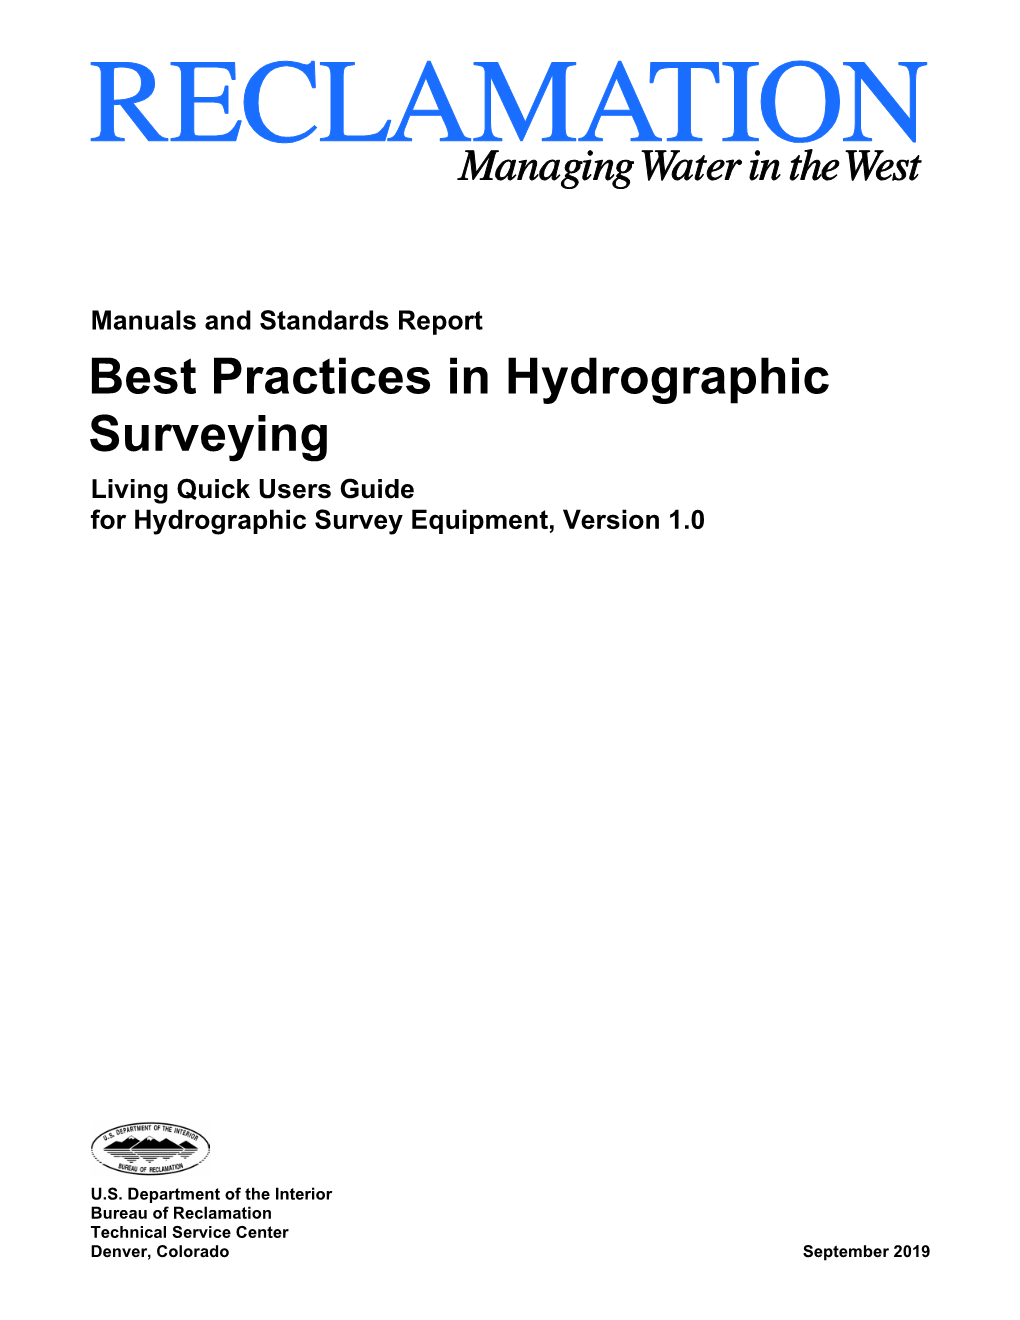 Best Practices in Hydrographic Surveying